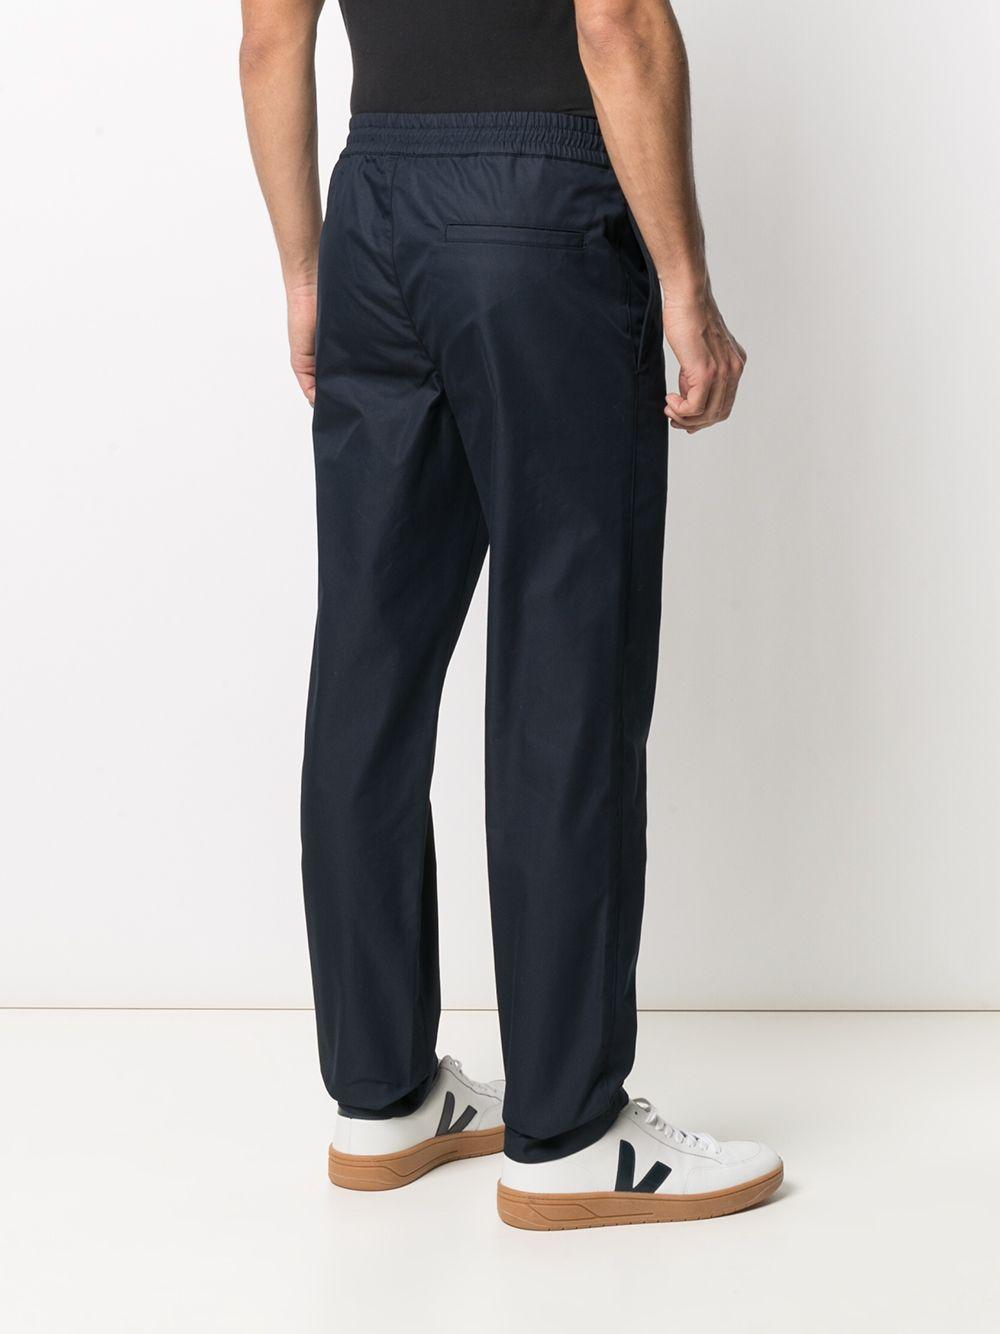 A.P.C. Cotton-blend Track-style Trousers in Blue for Men - Lyst